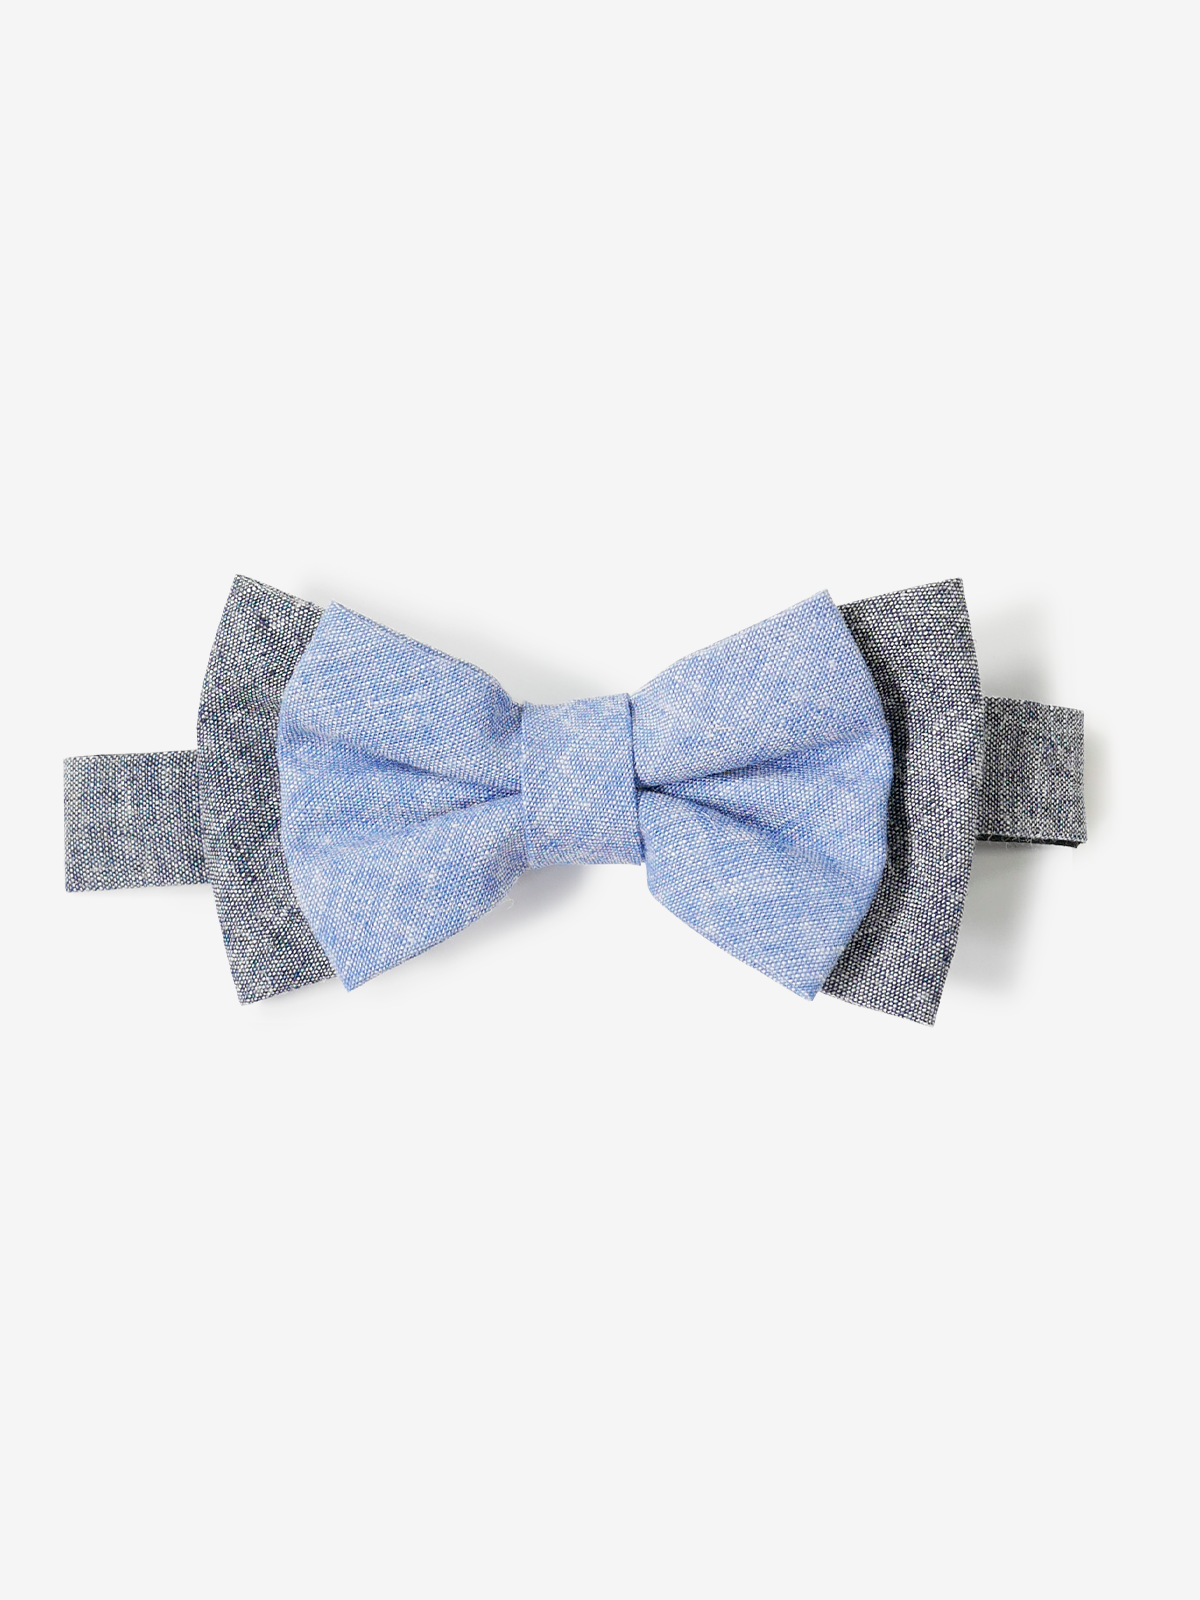 Chambray Bow Tie｜ブルー